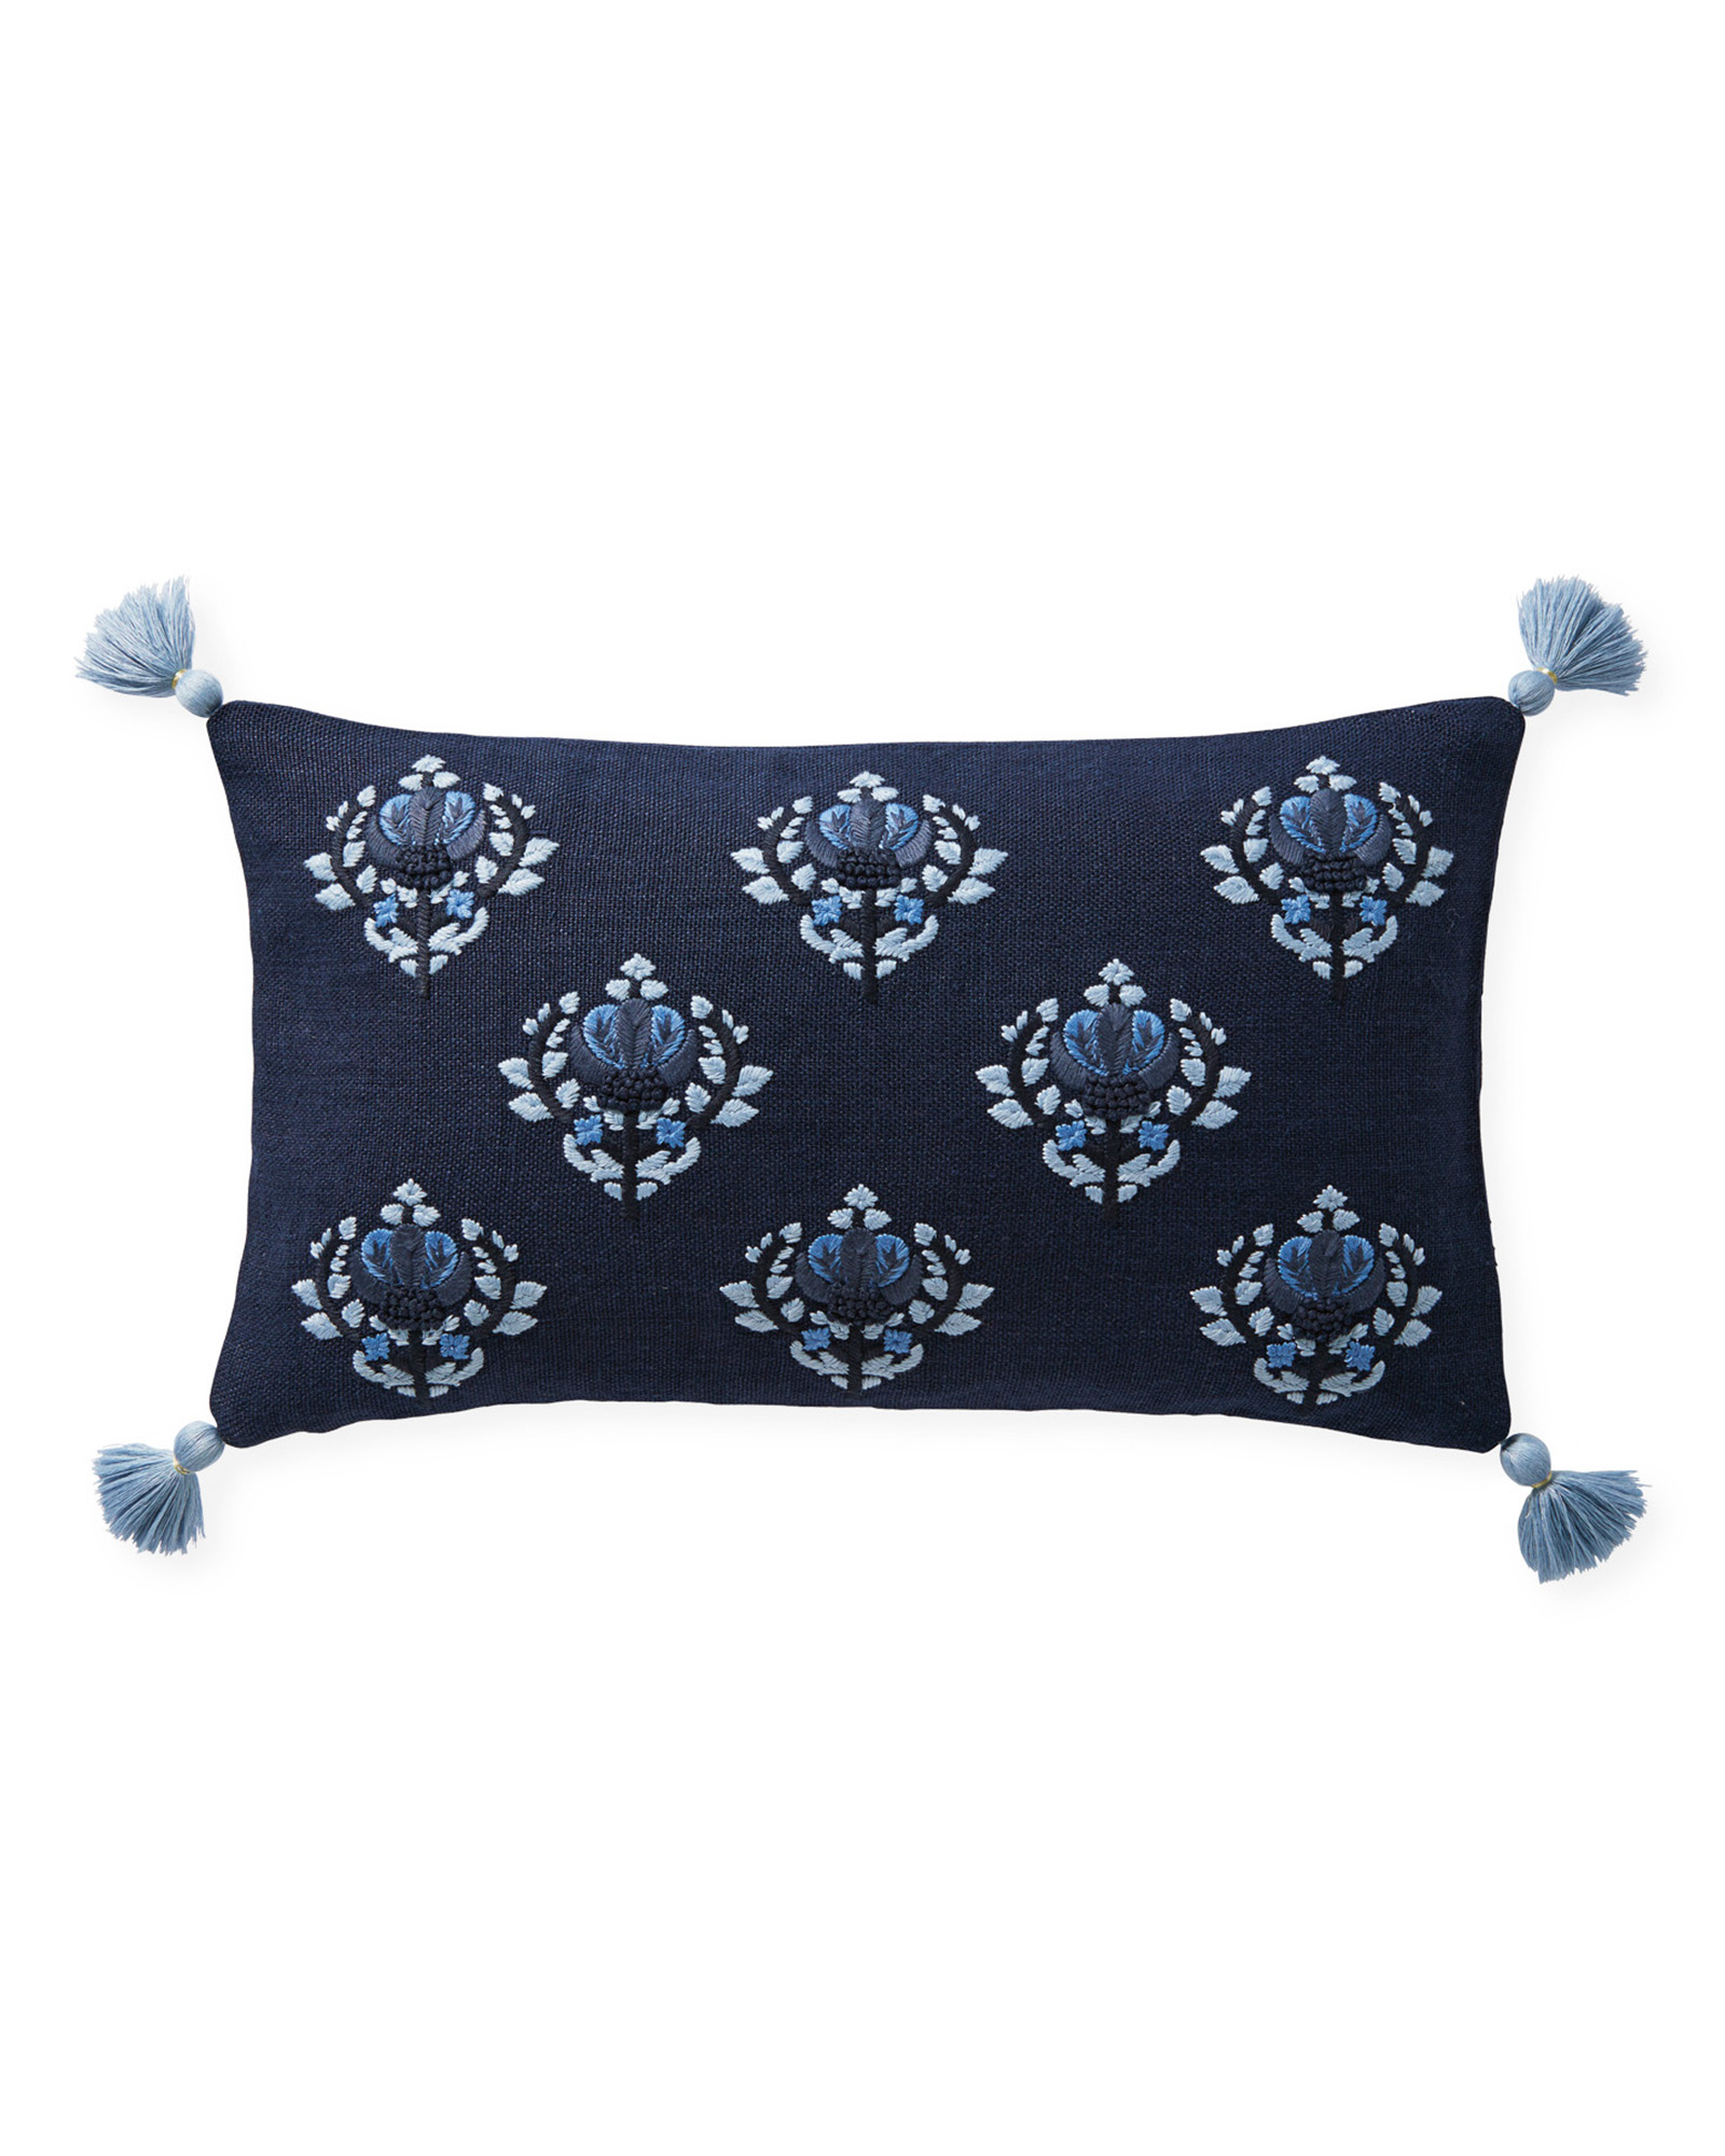 Kemp 12" x 21" Pillow Cover - Navy - Insert sold separately - Serena and Lily